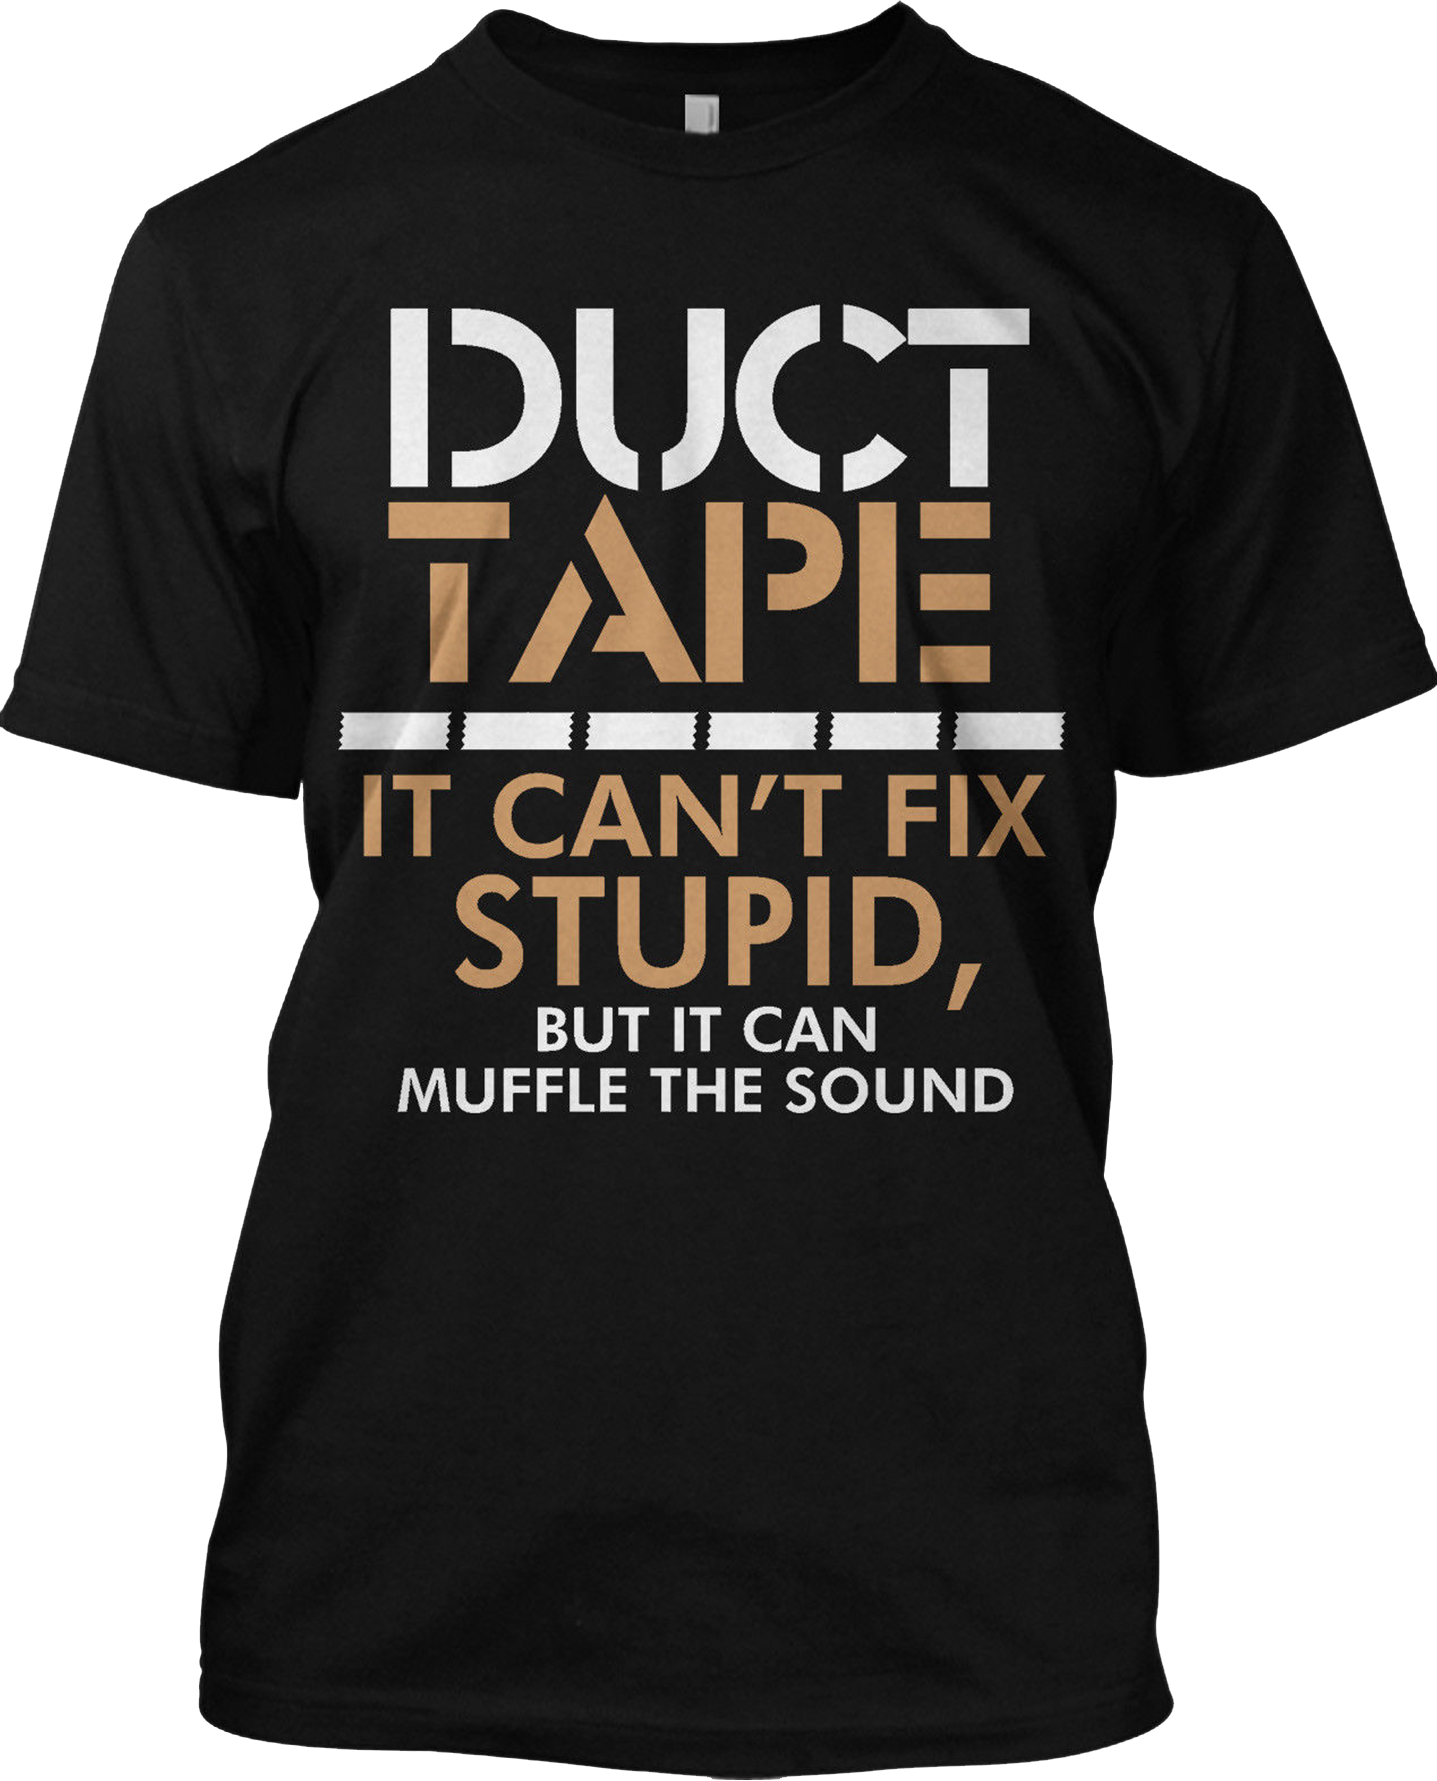 Duct Tape Can't Fix Stupid Muffle Sound Funny T Shirt Graphic Tee